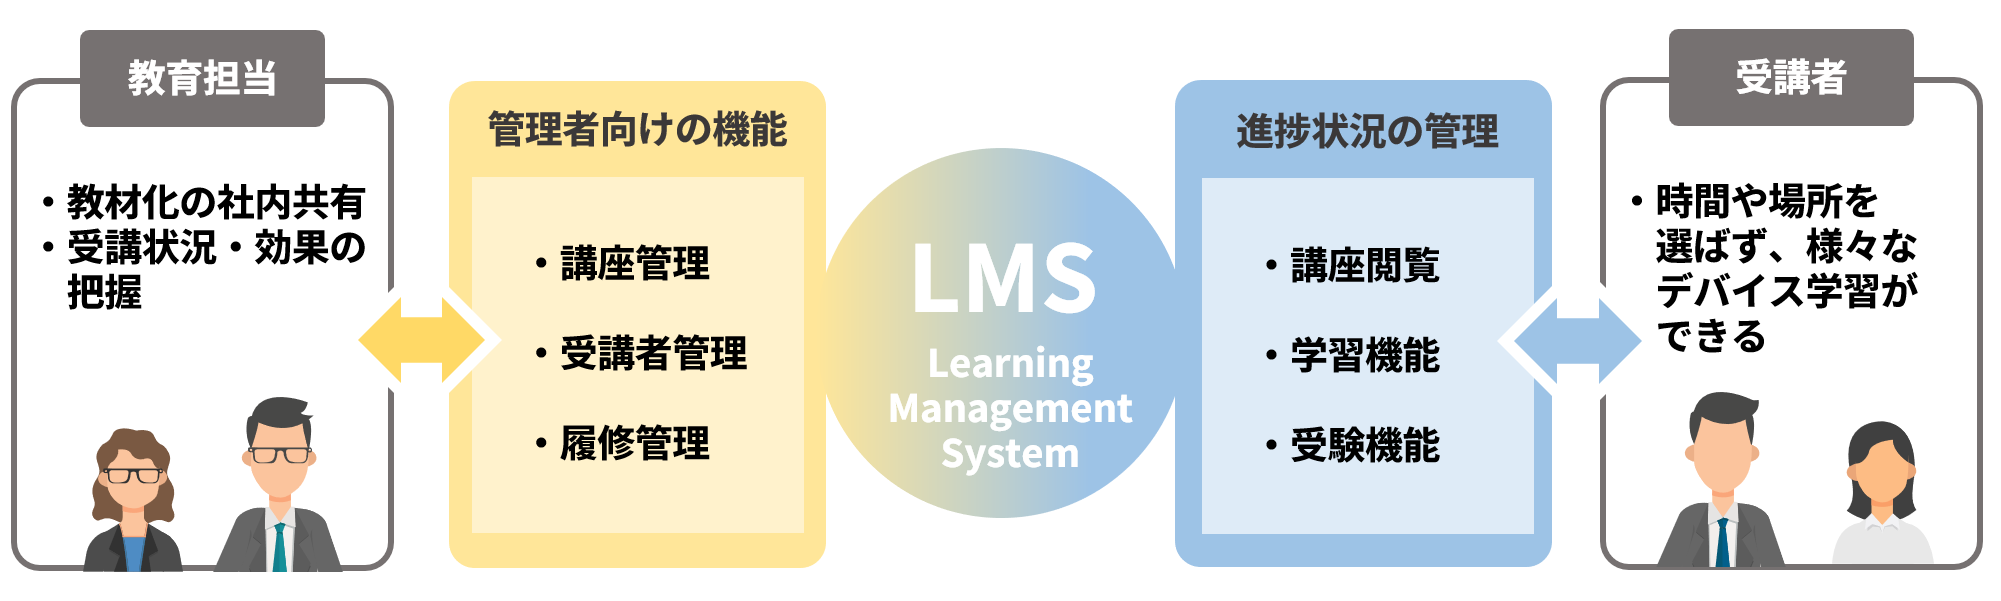 LMS（Learning Management System、学習管理システム）